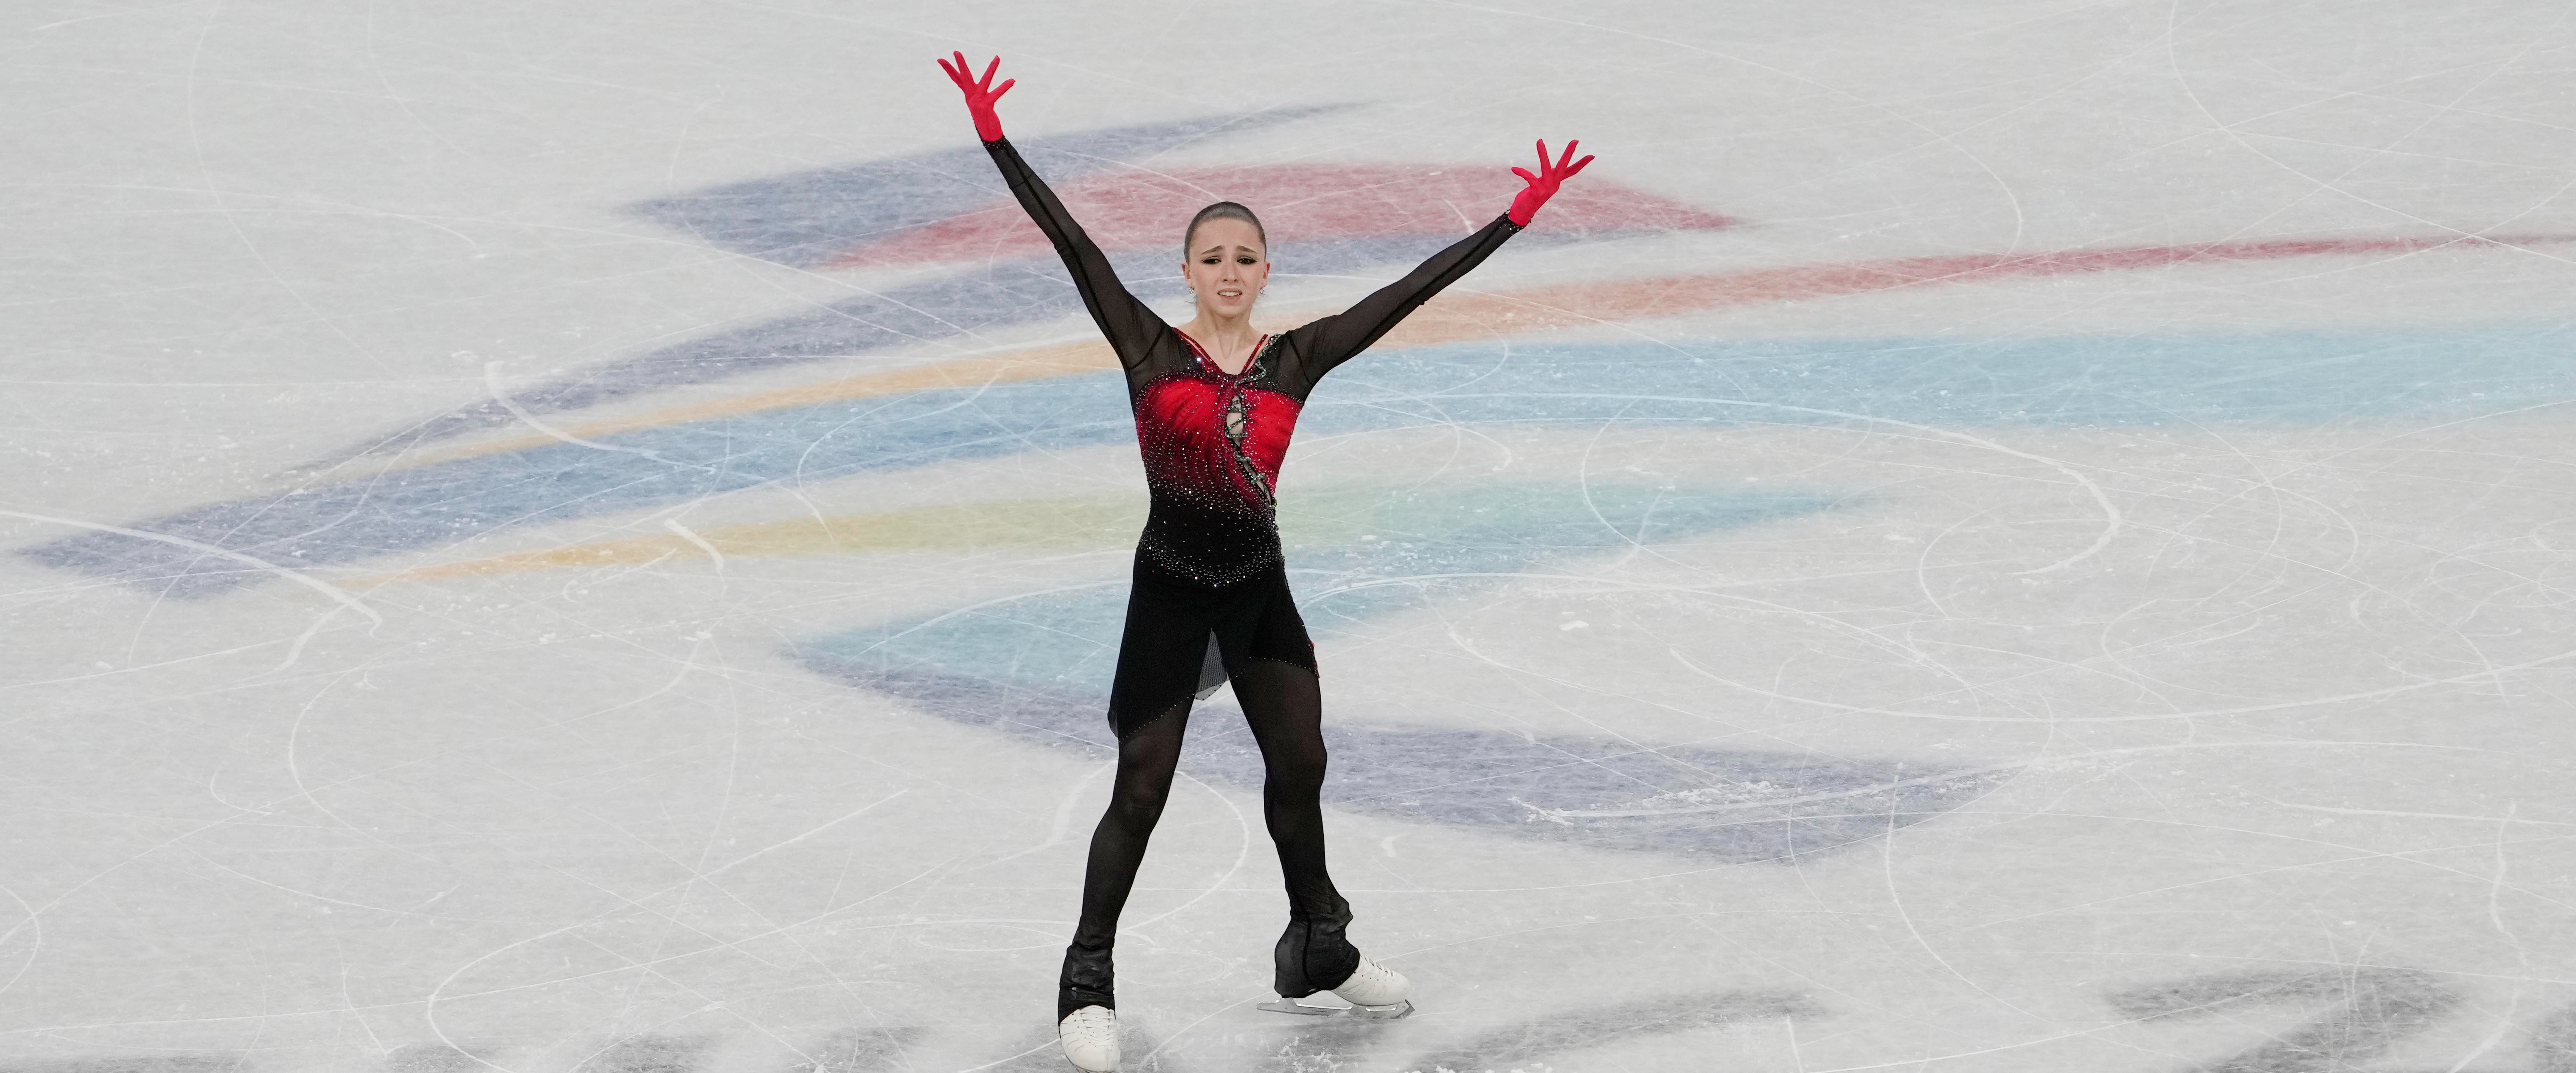 MUST-SEE: 15-year-old figure skater becomes the first to land a quad at the Olympics